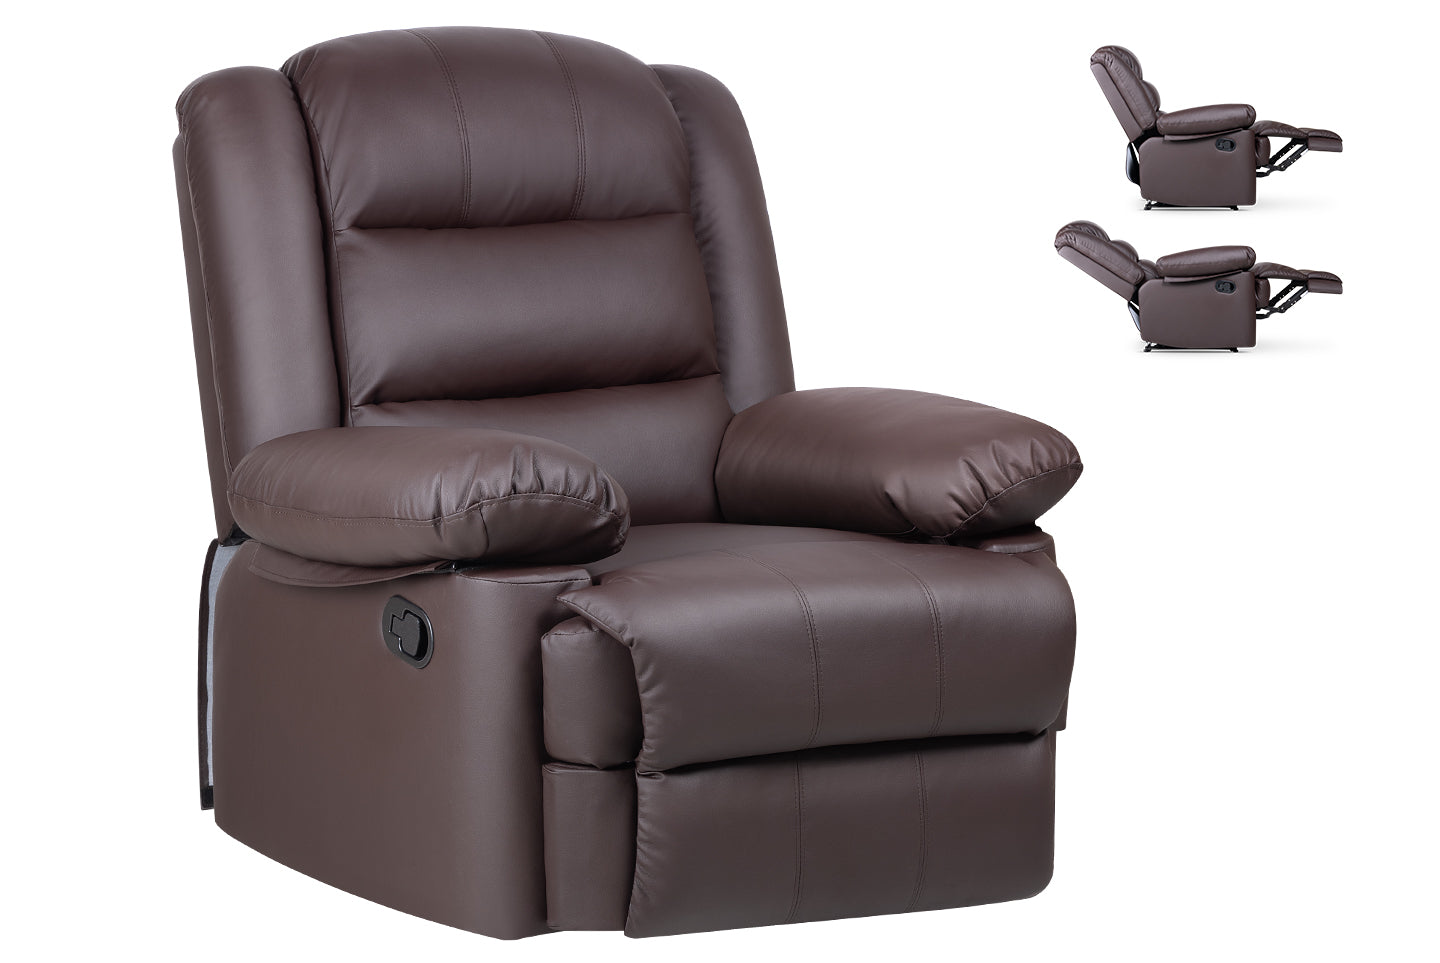 Armchair PU Leather Recliner Chair 110¡ã-160¡ã Manual Reclining Sofa with Padded Backrest Seat Retractable Footrest Brown